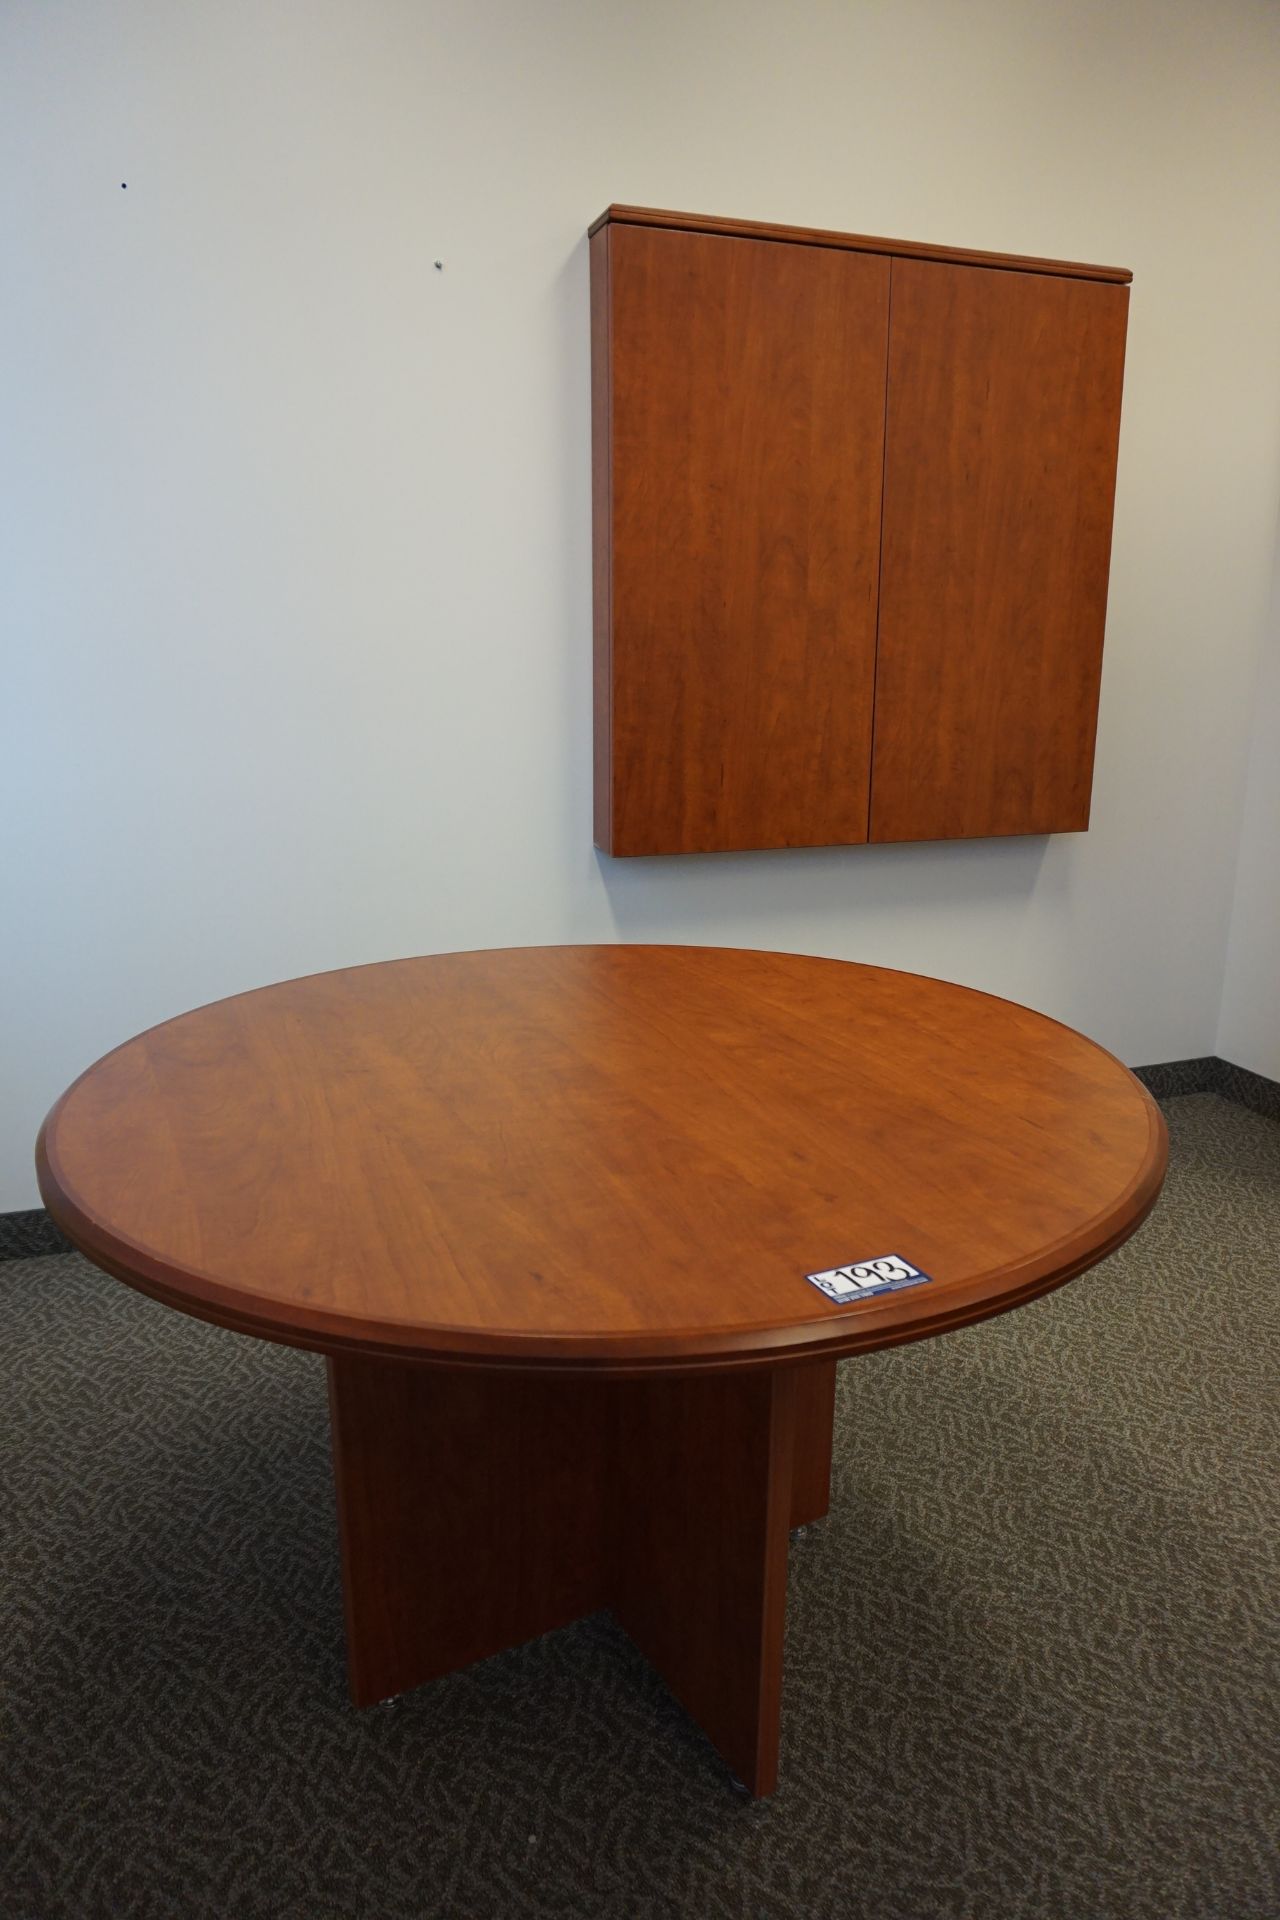 CWI Executive Suite with U-Shaped Desk - Image 2 of 2